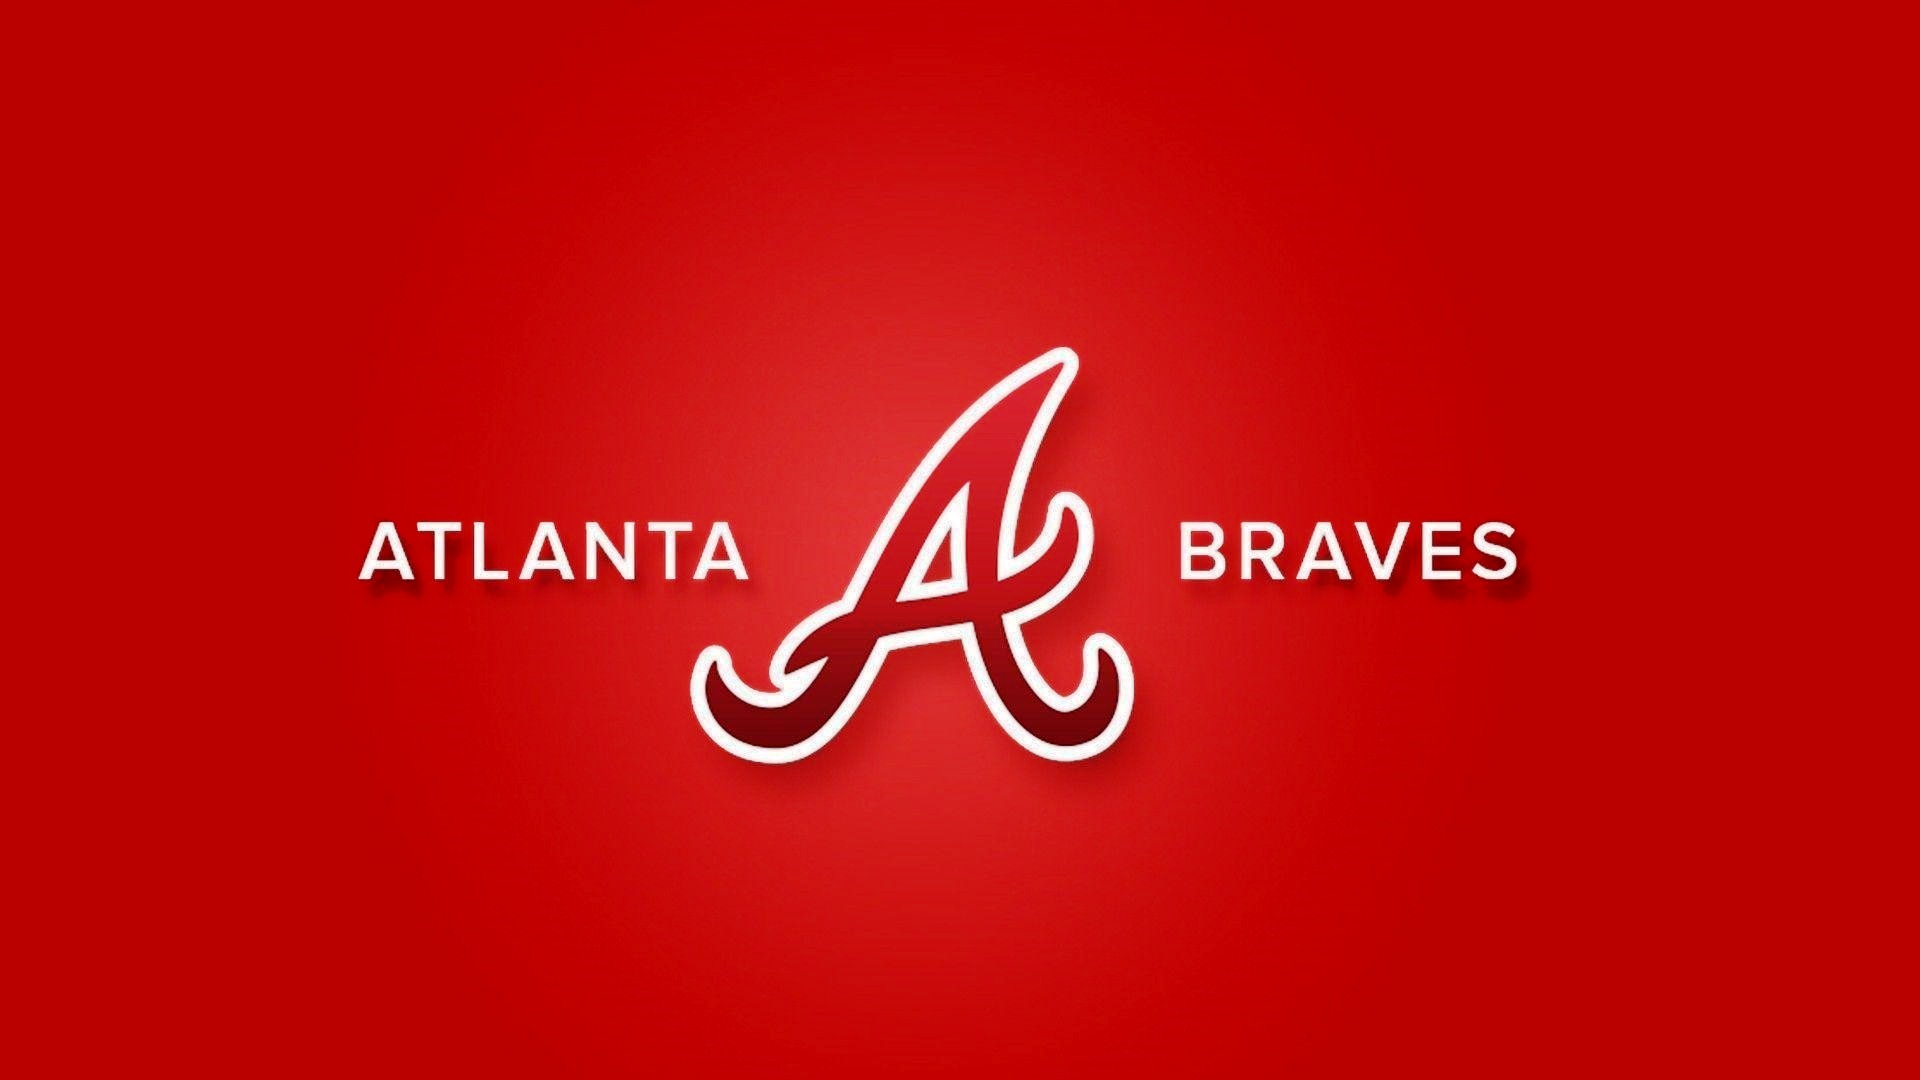 Wallpapers HD Atlanta Braves with high-resolution 1920x1080 pixel. You can use this wallpaper for Mac Desktop Wallpaper, Laptop Screensavers, Android Wallpapers, Tablet or iPhone Home Screen and another mobile phone device